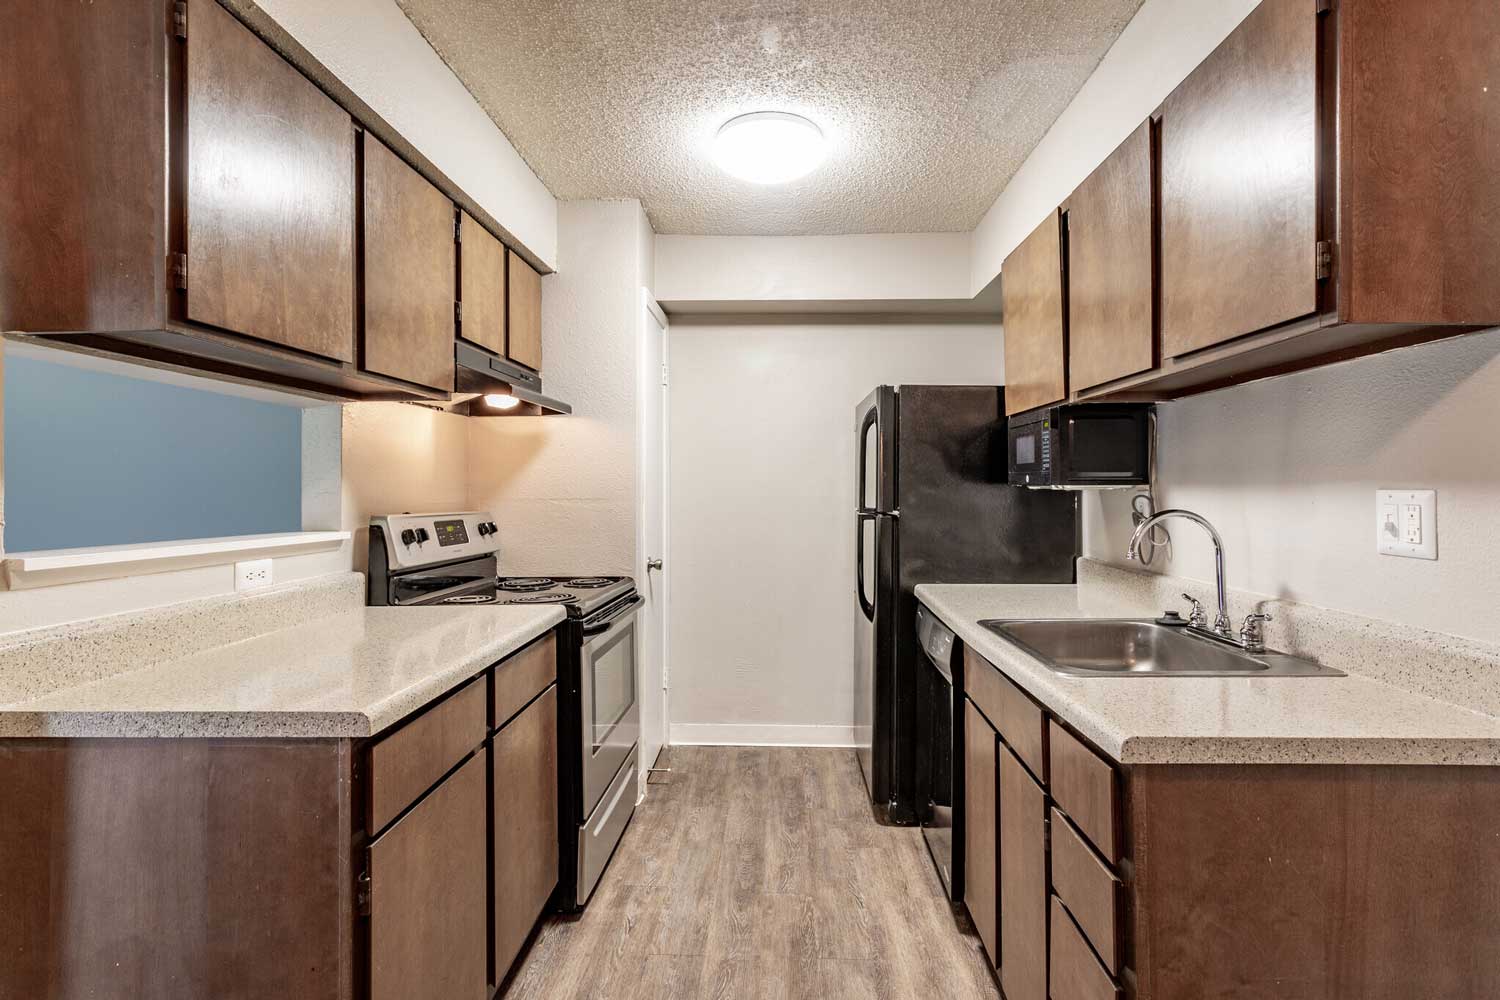 Updated Kitchen Designs at Rustic Woods Apartments in Tulsa, Oklahoma